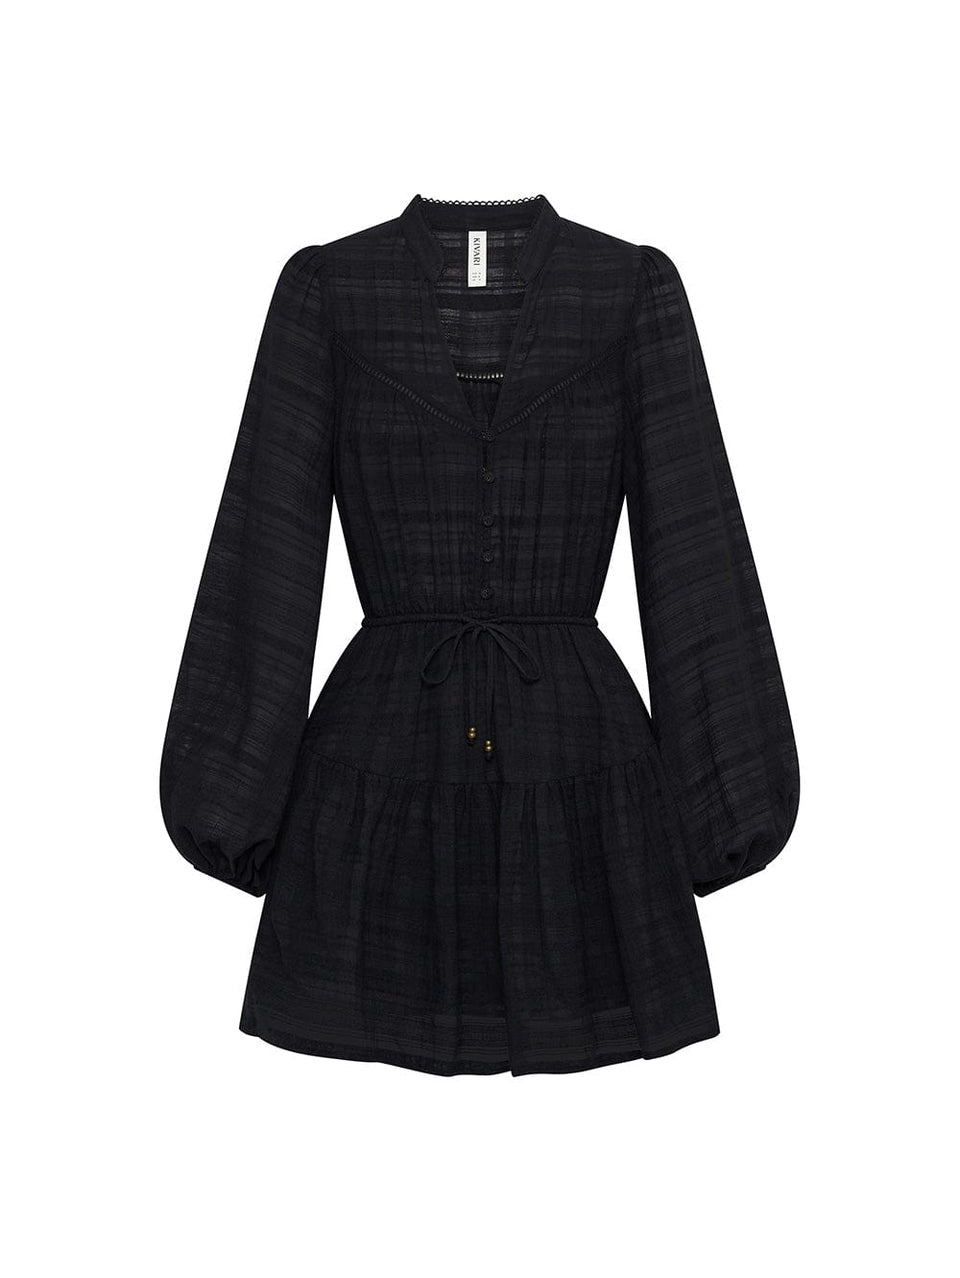 Ghost image of the KIVARI Rafaelle Mini Dress: a black dress made from cotton check featuring a button-front bodice, full-length blouson sleeves, drawstring waist and gathered hem frill.